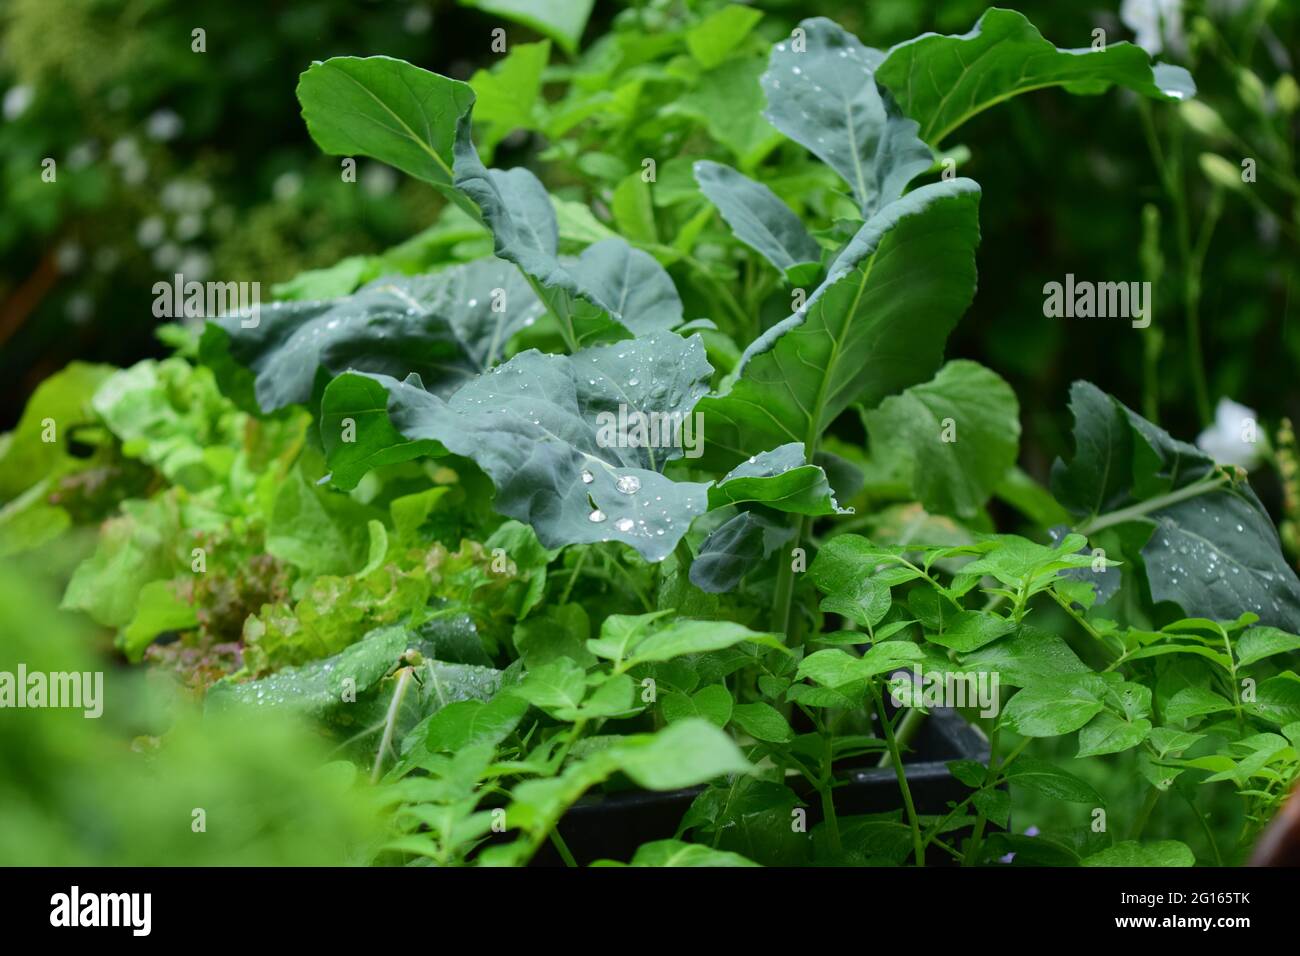 Mixed green growing vegetables in the rain Stock Photo